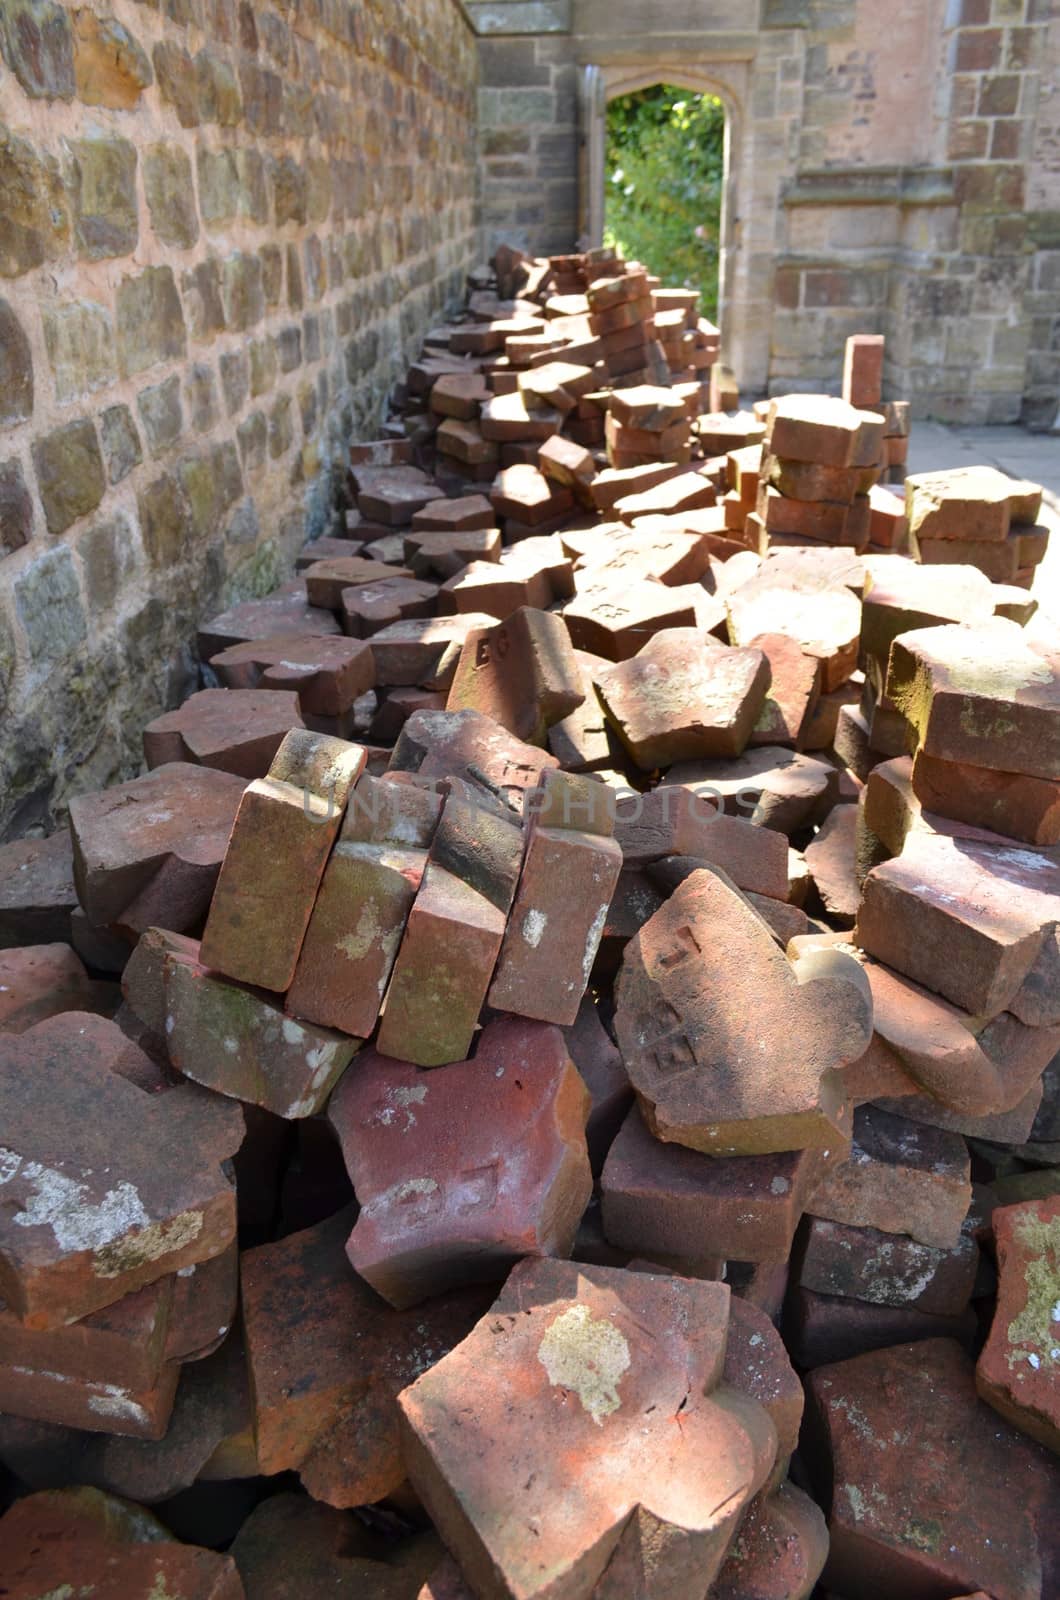 Pile of old clay bricks and roof tiles left in a garden.